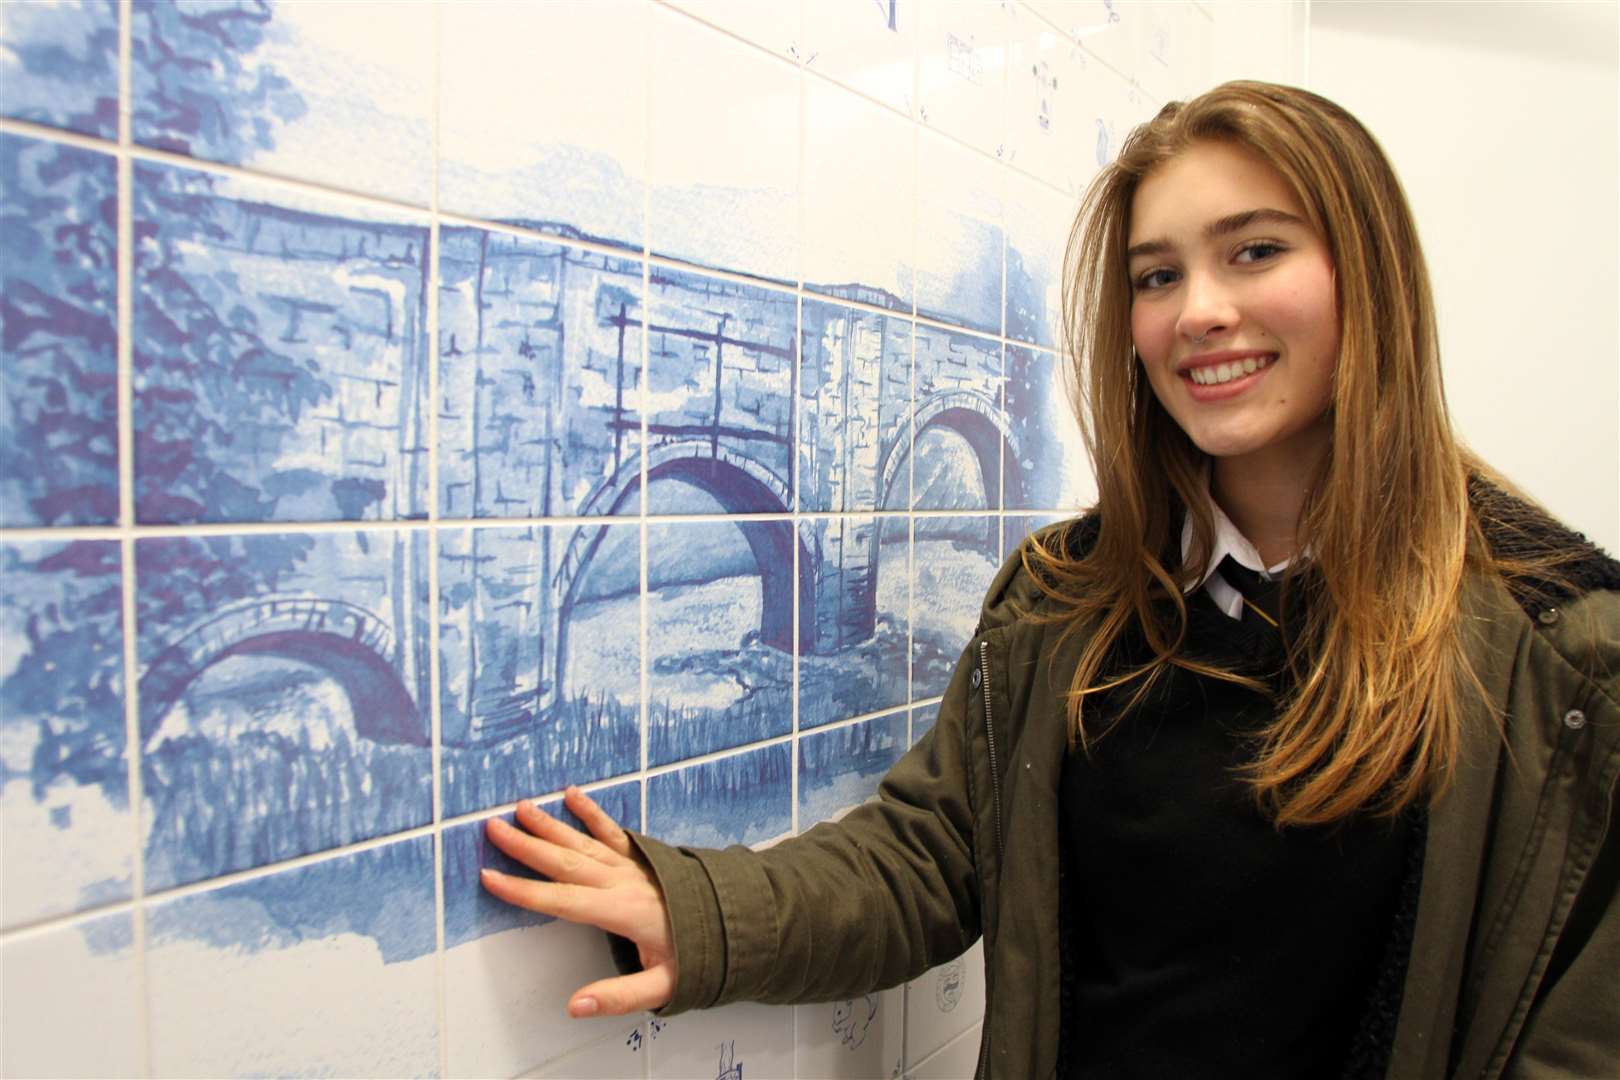 Rosie Trussell with her creation of the local landmark which has been recreated on tiles in the toilet block.